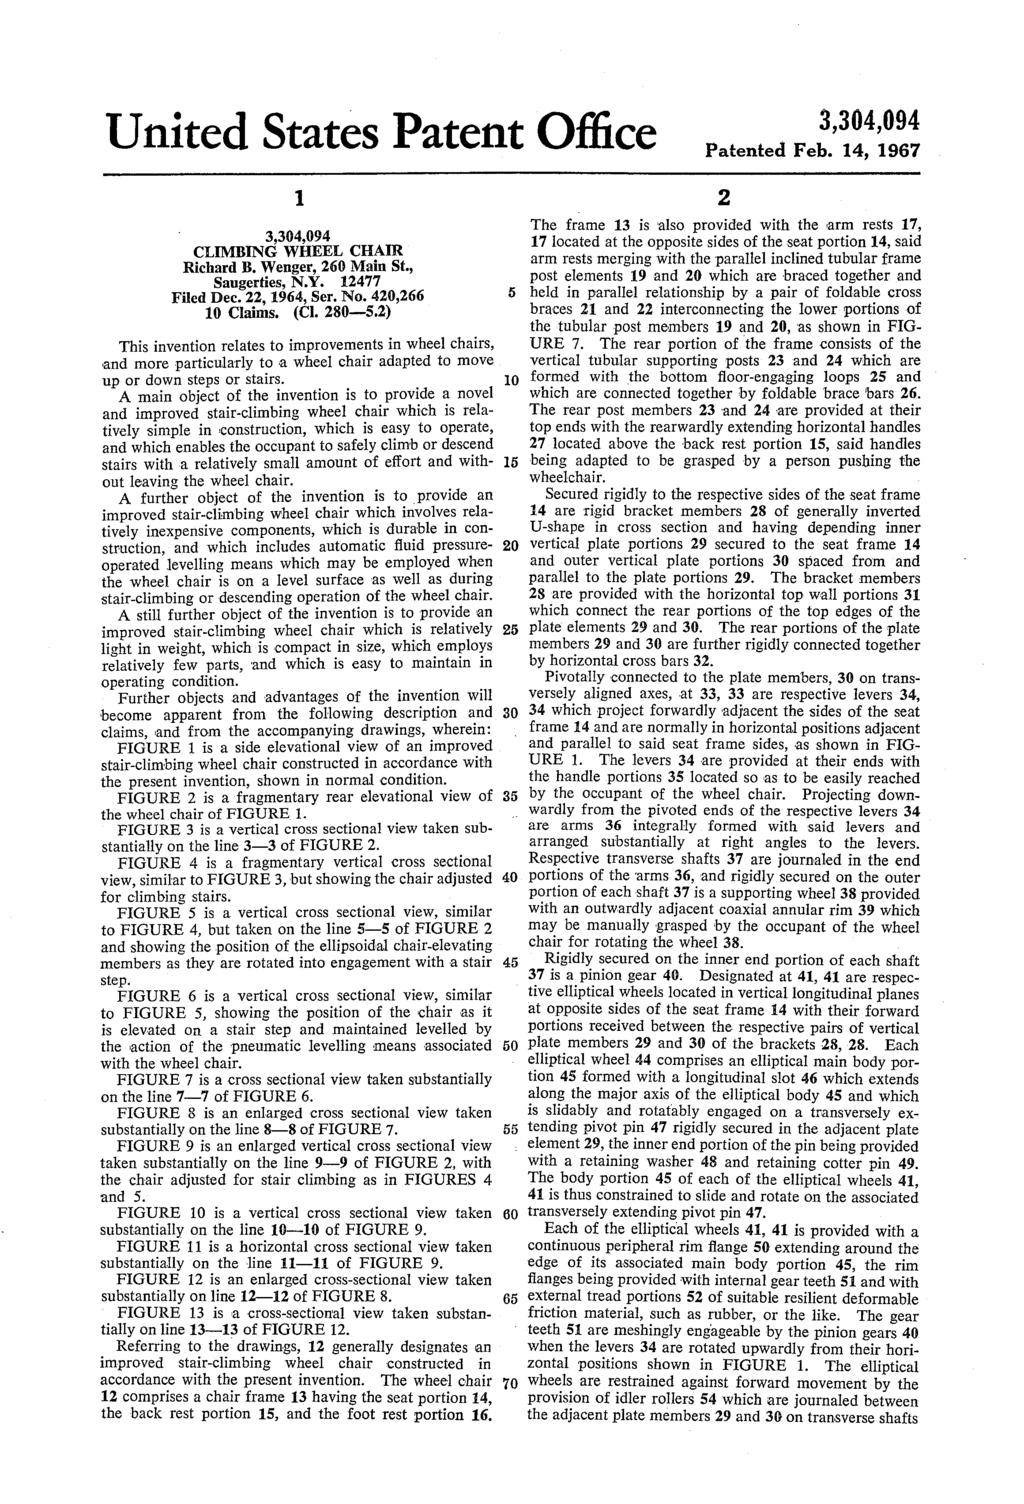 United States Patent Office Patented Feb. 14, 1967 1. CLIMBING WHEEL CHAIR Richard B. Wenger, 260 Main St., Saugerties, N.Y. 12477 Filed Dec. 22, 1964, Ser. No. 420,266 10 Claims. (Cl. 280-.